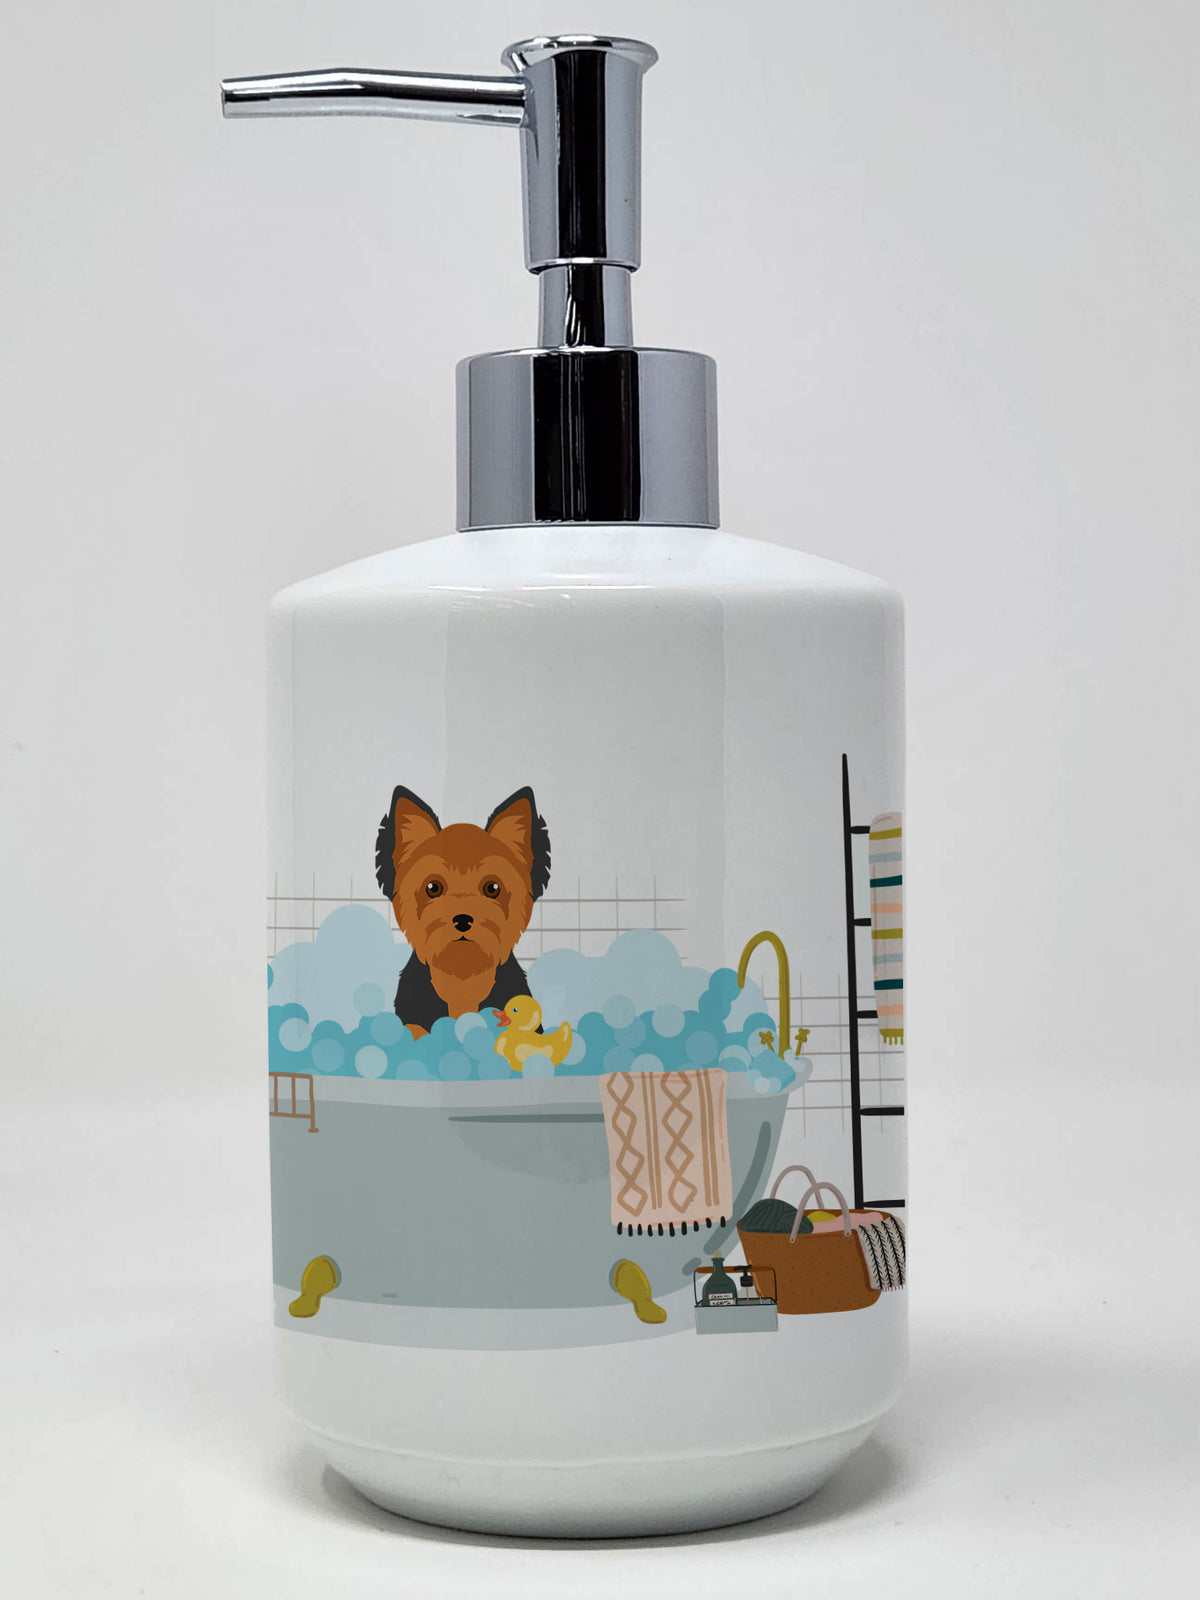 Buy this Black and Tan Puppy Cut Yorkshire Terrier Ceramic Soap Dispenser